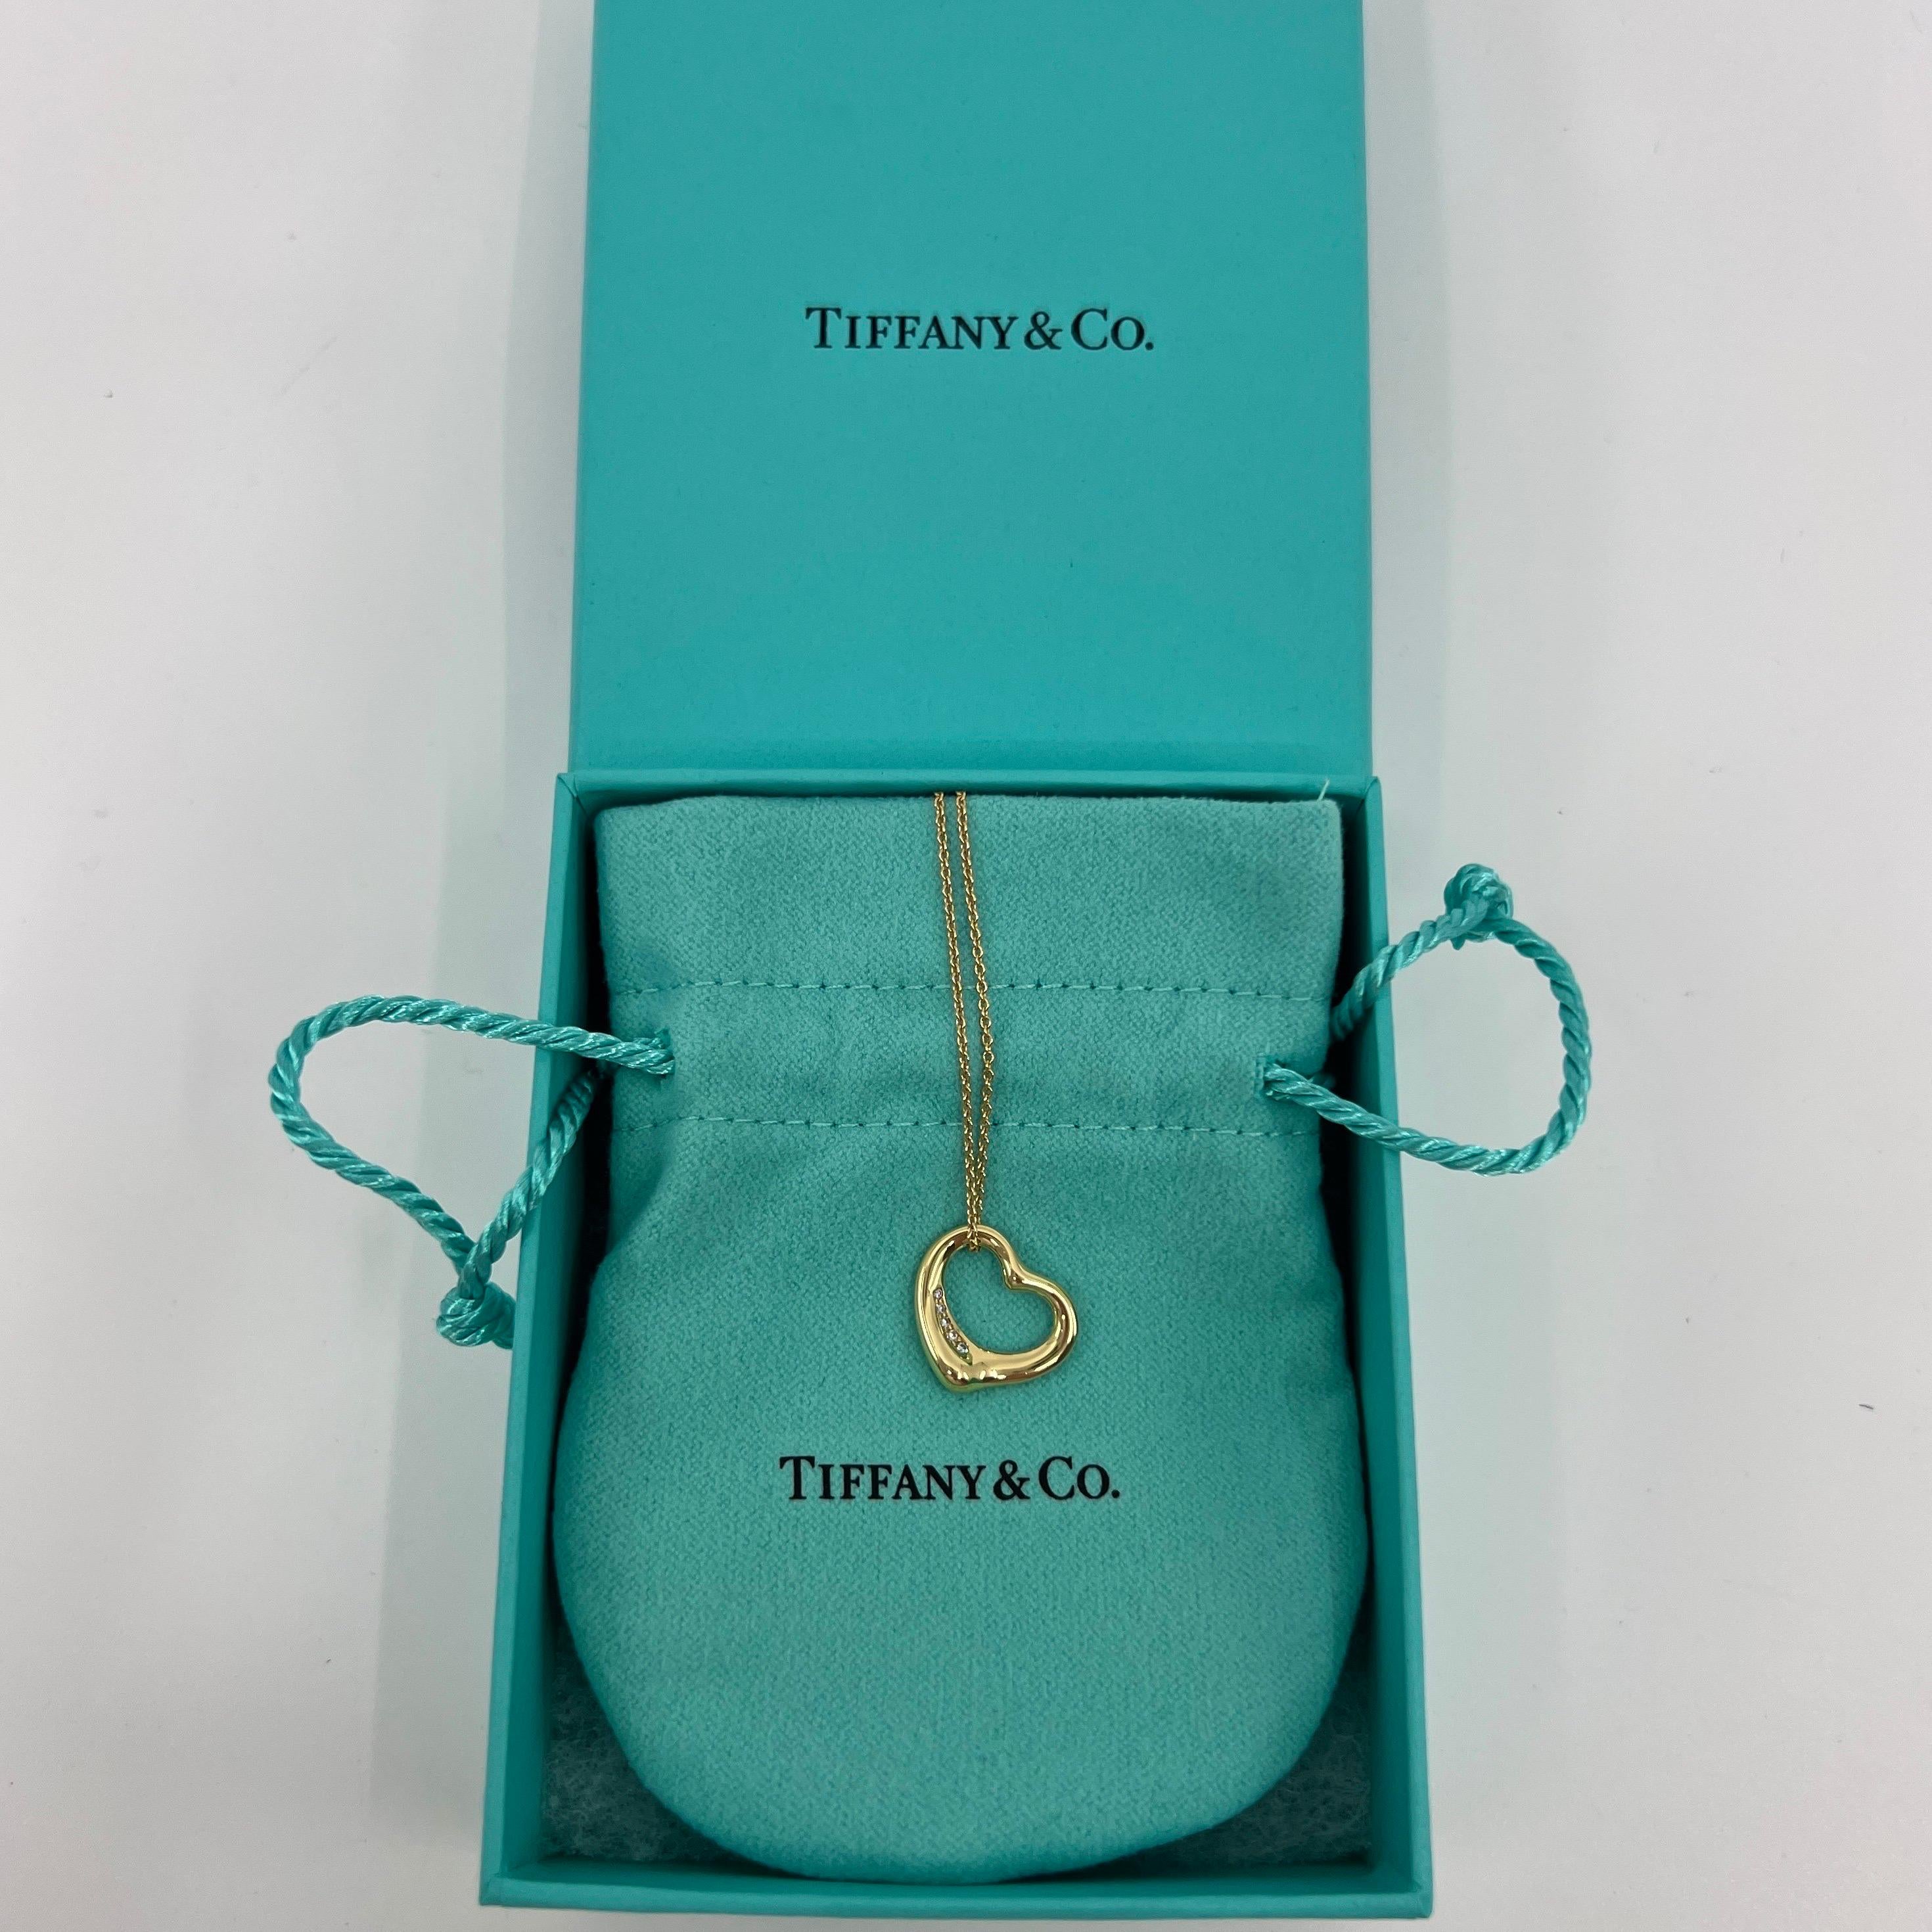 Tiffany & Co. Elsa Peretti Open Heart Diamond 18k Yellow Gold Pendant Necklace.

A beautiful and authentic Tiffany & Co open heart pendant from the stylish and popular Elsa Peretti range. 

The pendant and chain are 18k solid gold and the pendant is